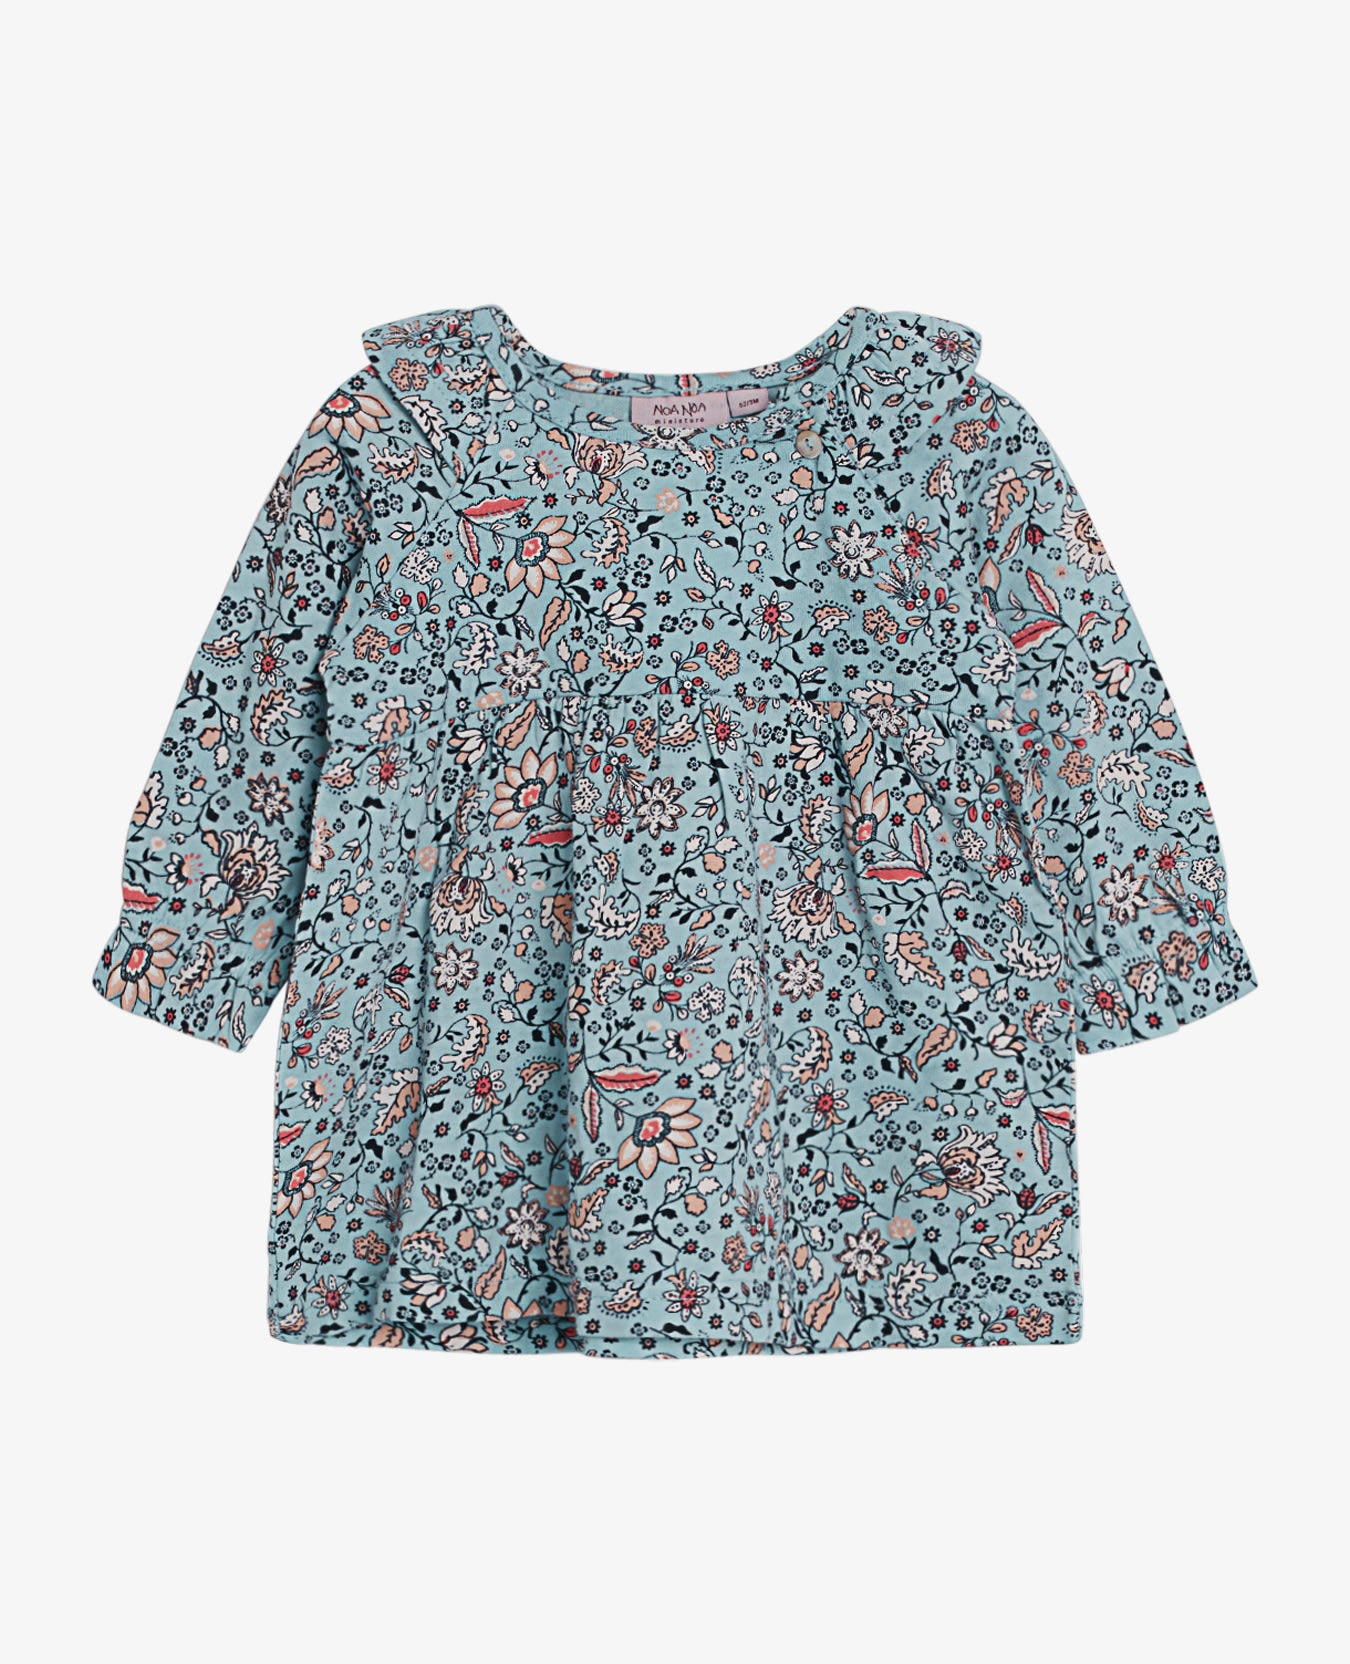 BABY NEW FLORAL JERSEY DRESS